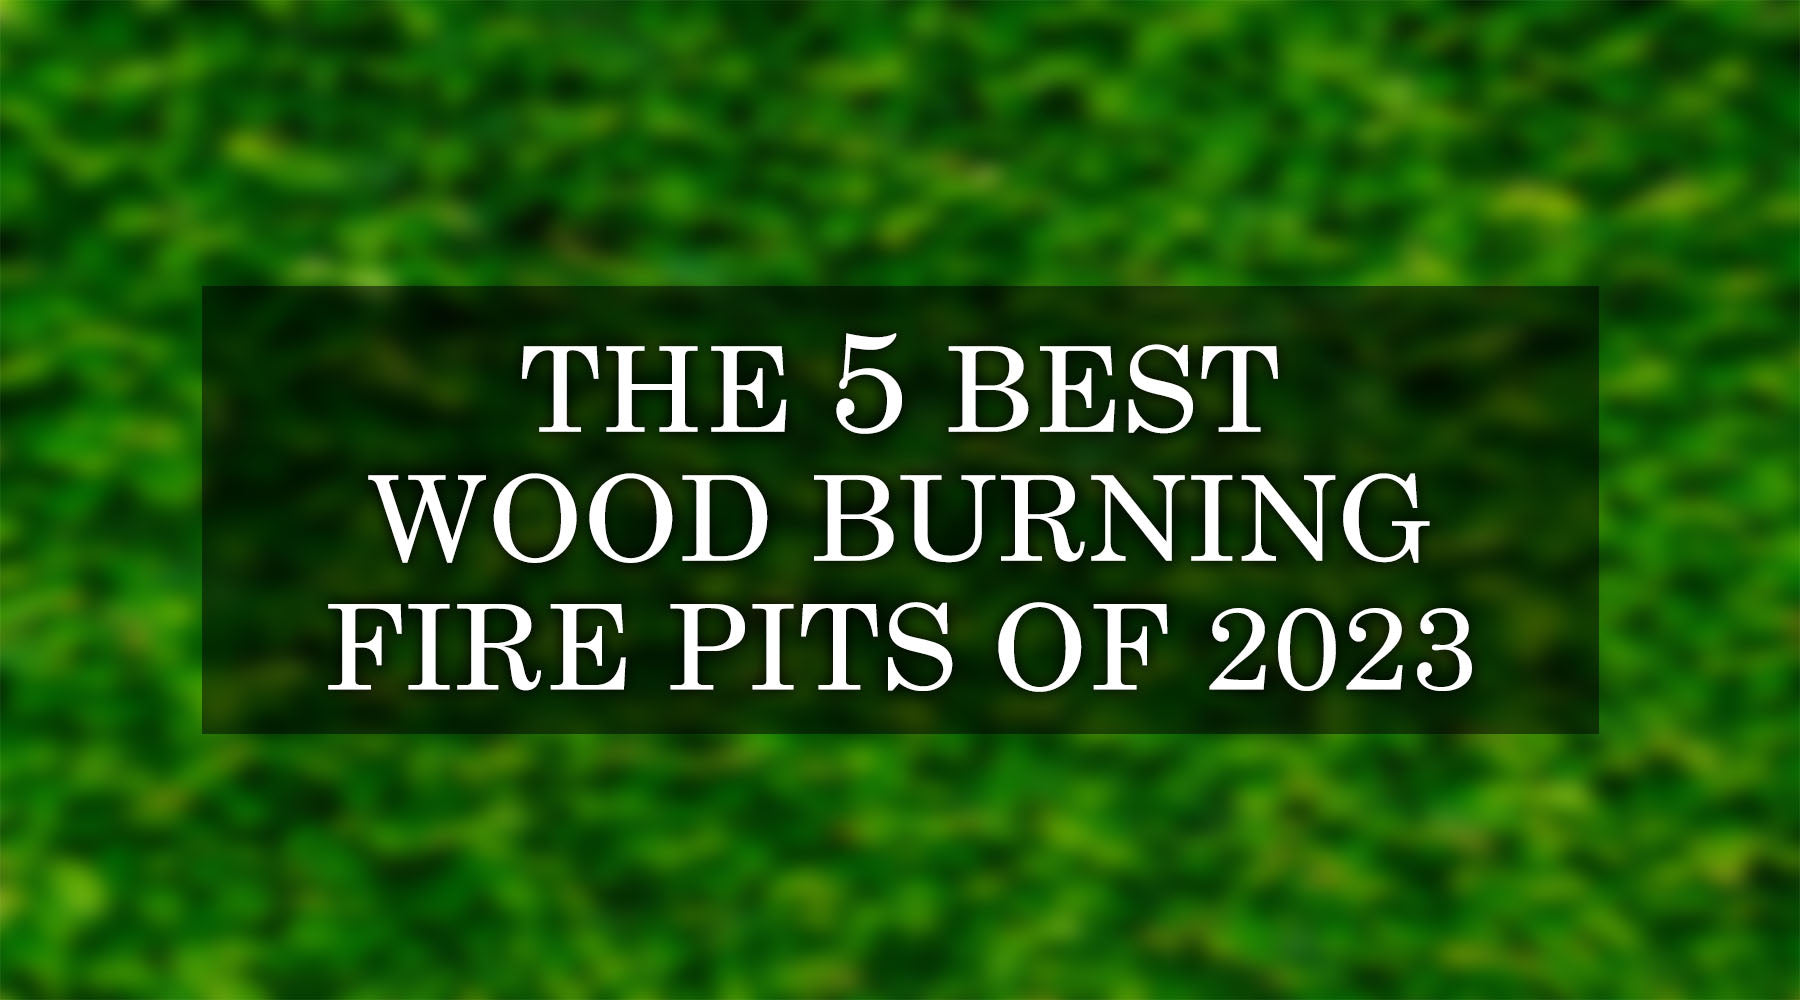 The 5 Best Wood Burning Fire Pits of 2023